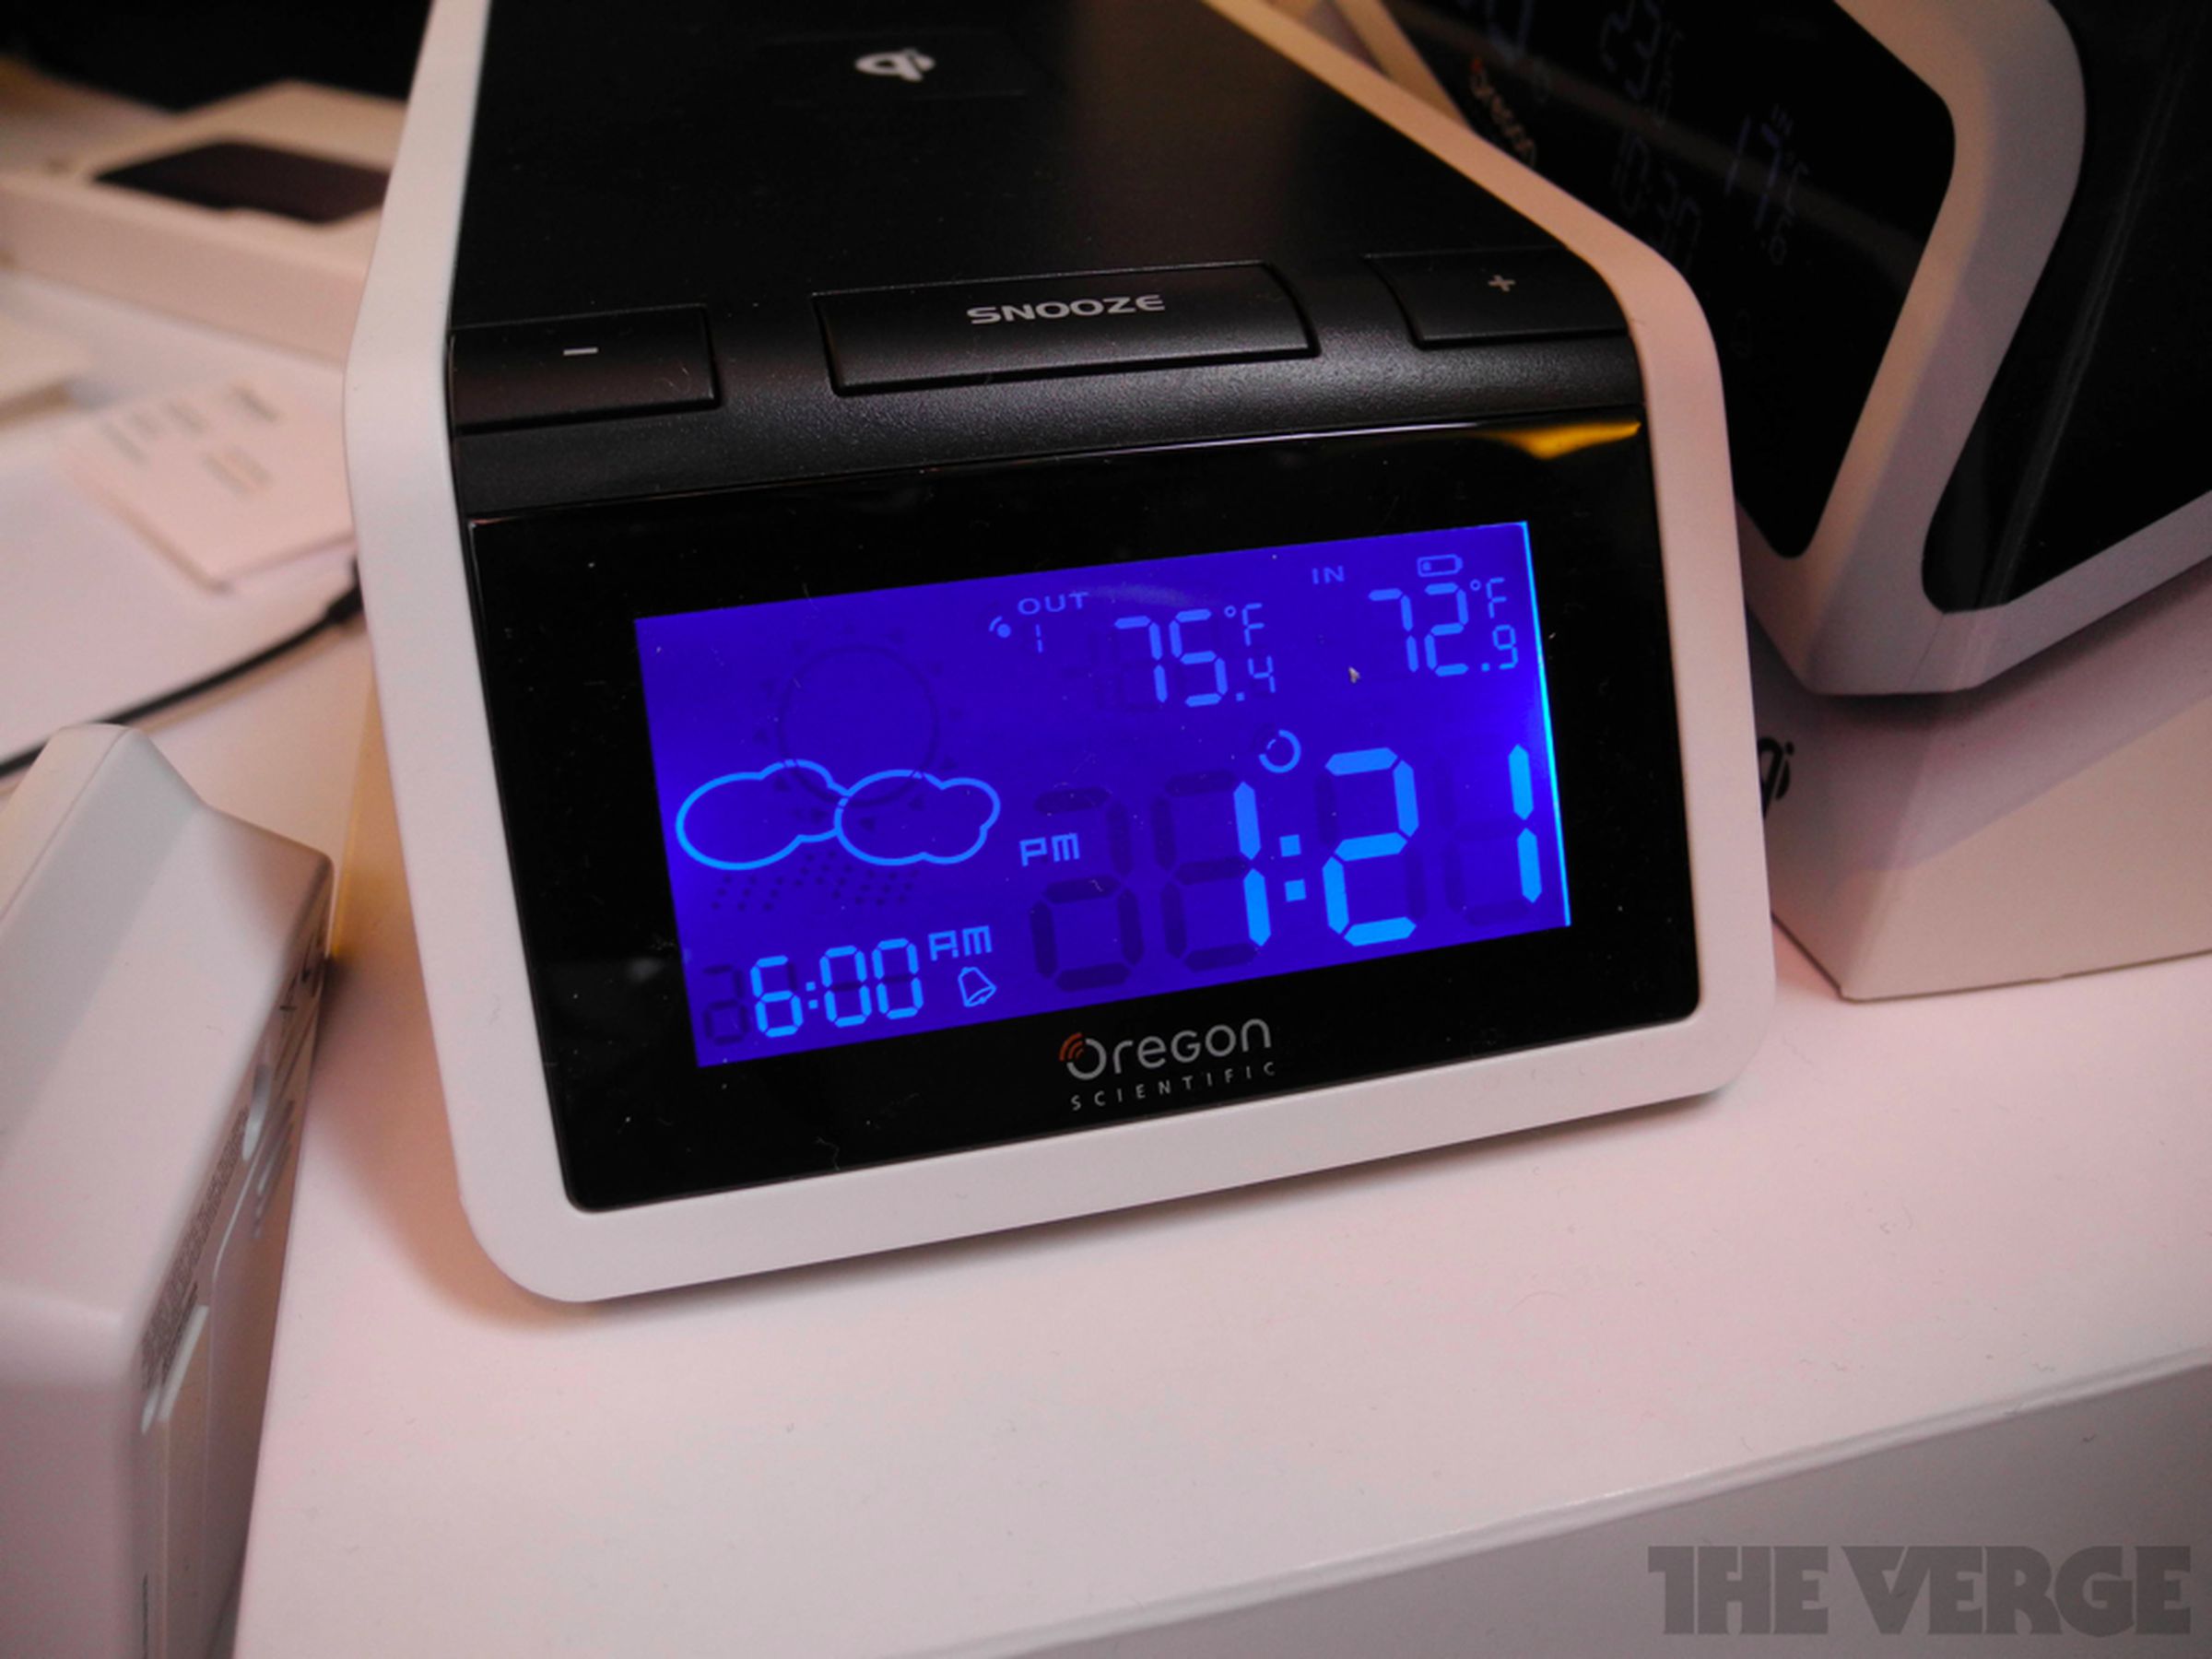 Oregon Scientific Time and Wireless Charging Station+, ATCMini camera, and more (hands-on pictures)